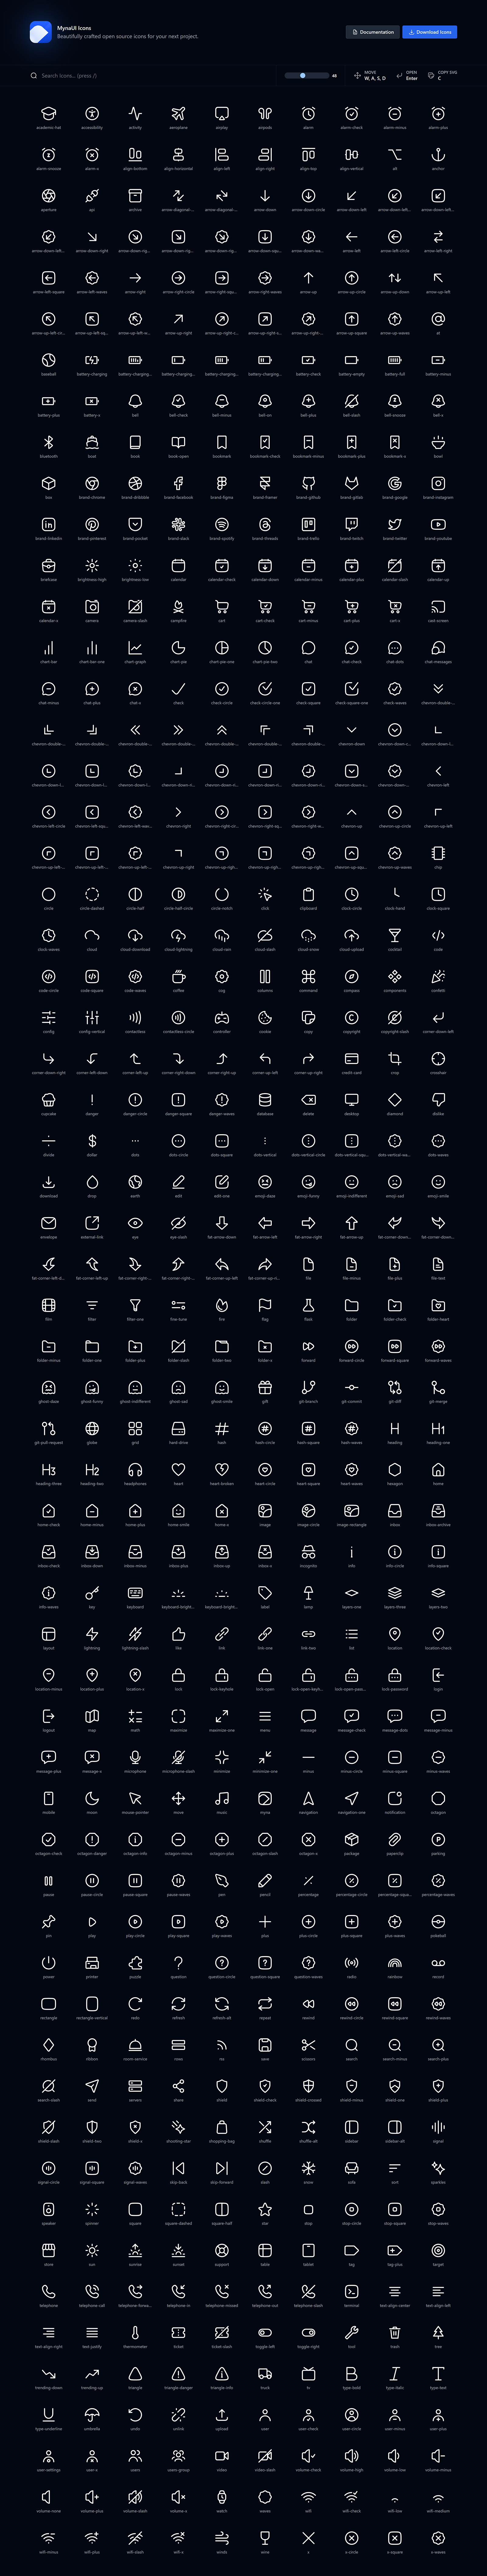 MynaUI Icons - Free & Open Source Icons